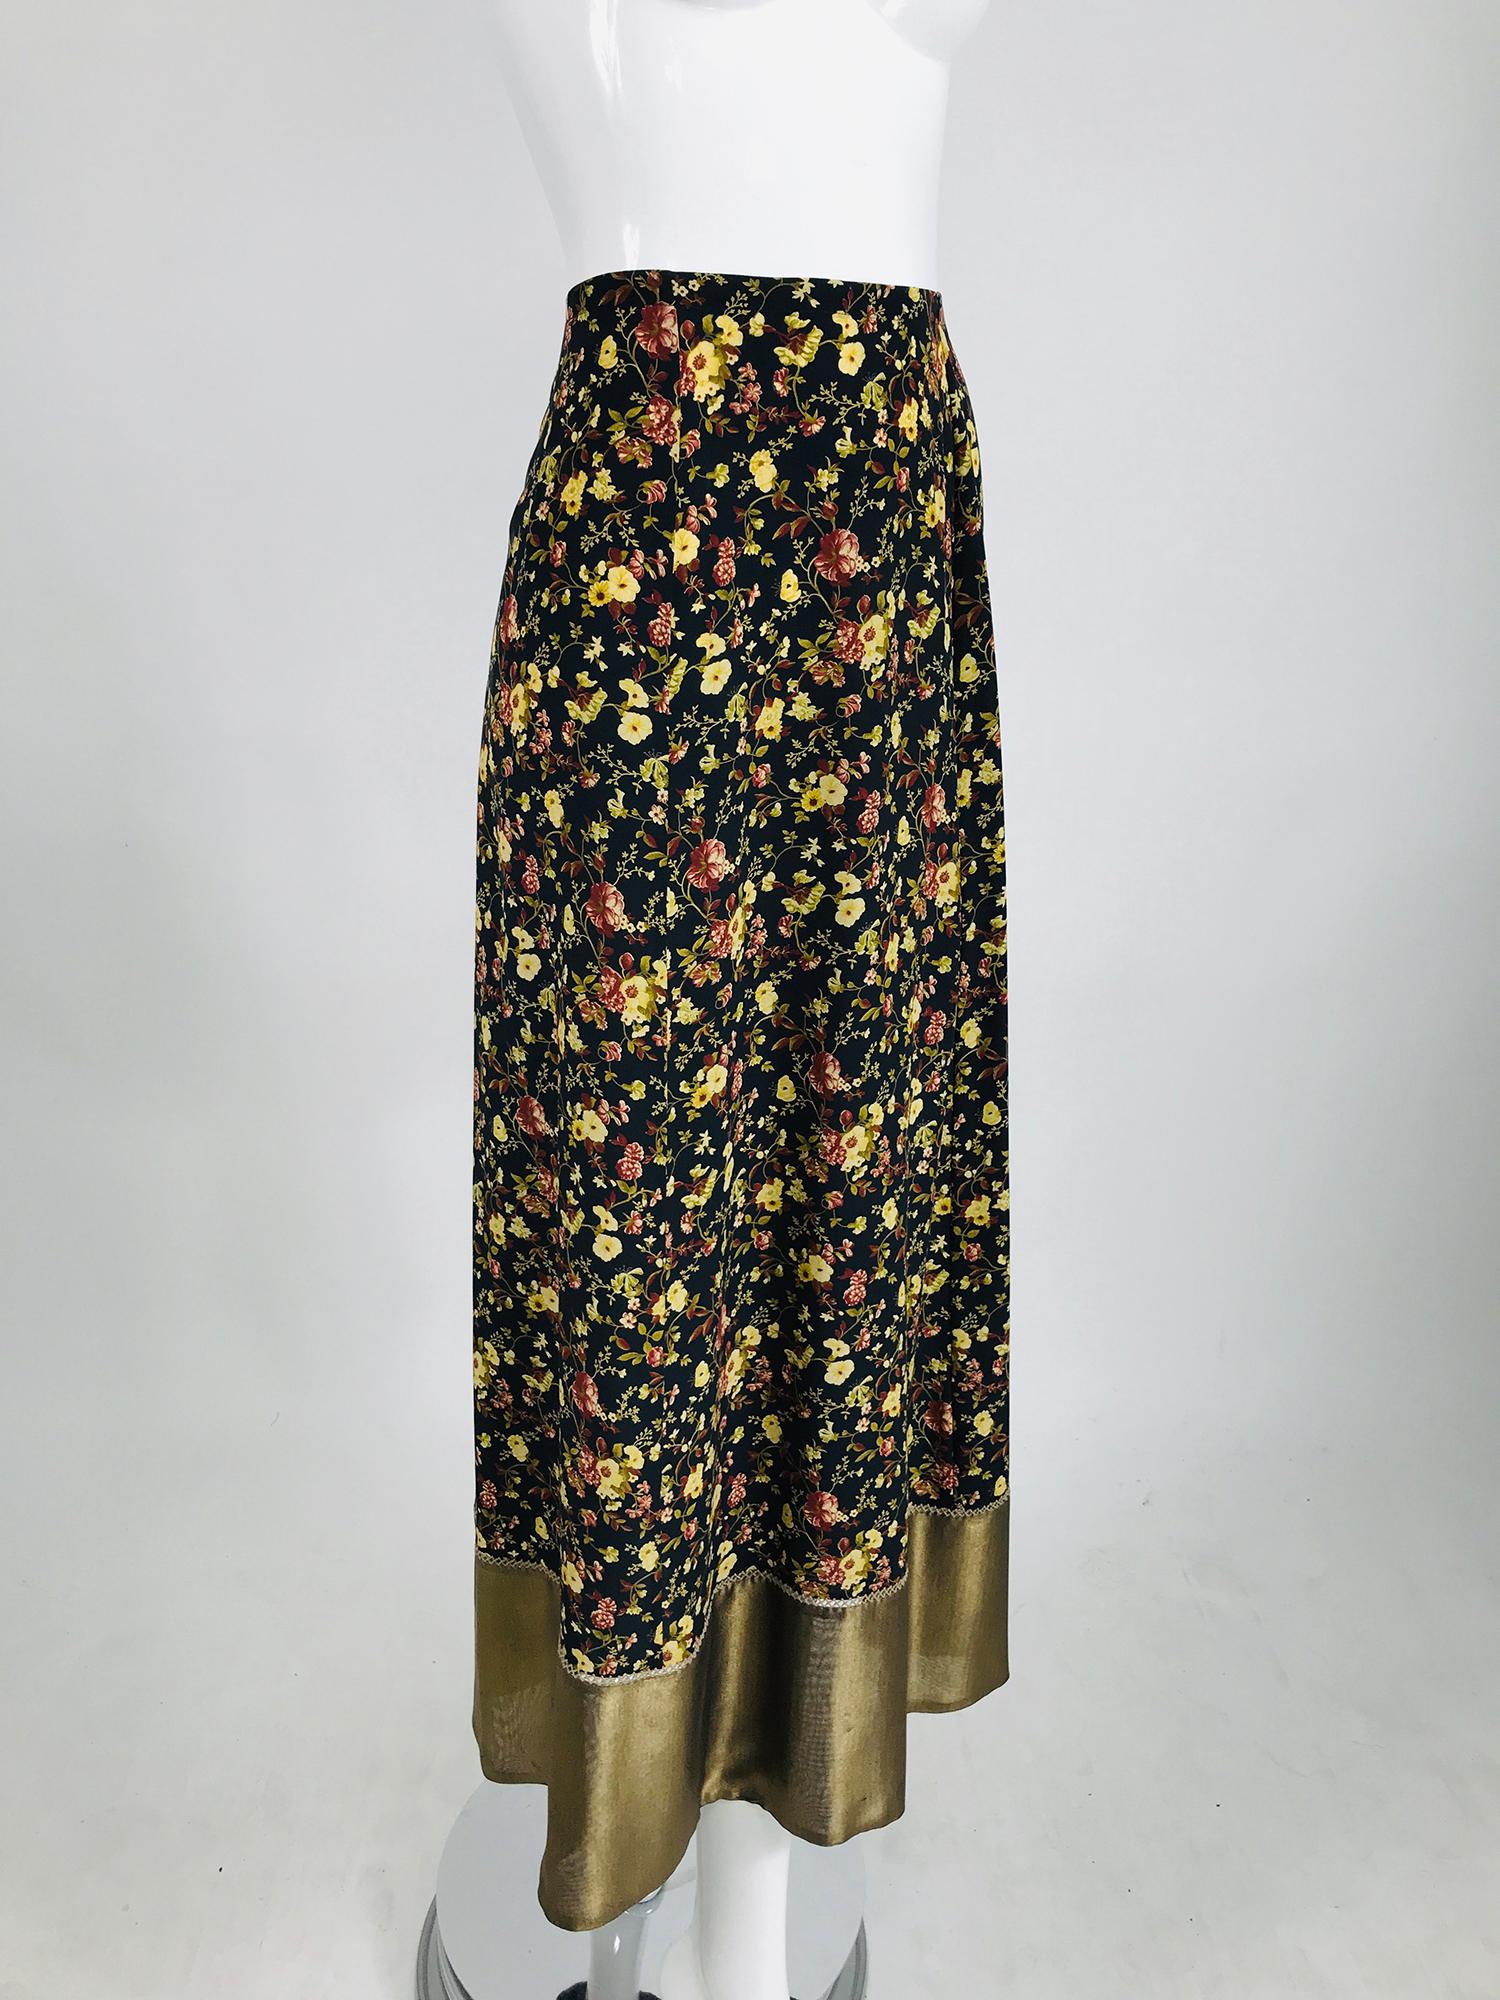 Plein Sud floral silk praire skirt with gold hem. Maxi skirt in a beautiful floral print with a gold silk hem that is attached with embroidery. Gored A linedskirt. Unlined. The skirt adjusts with draw self ribbons at the skirt waist back. Marked